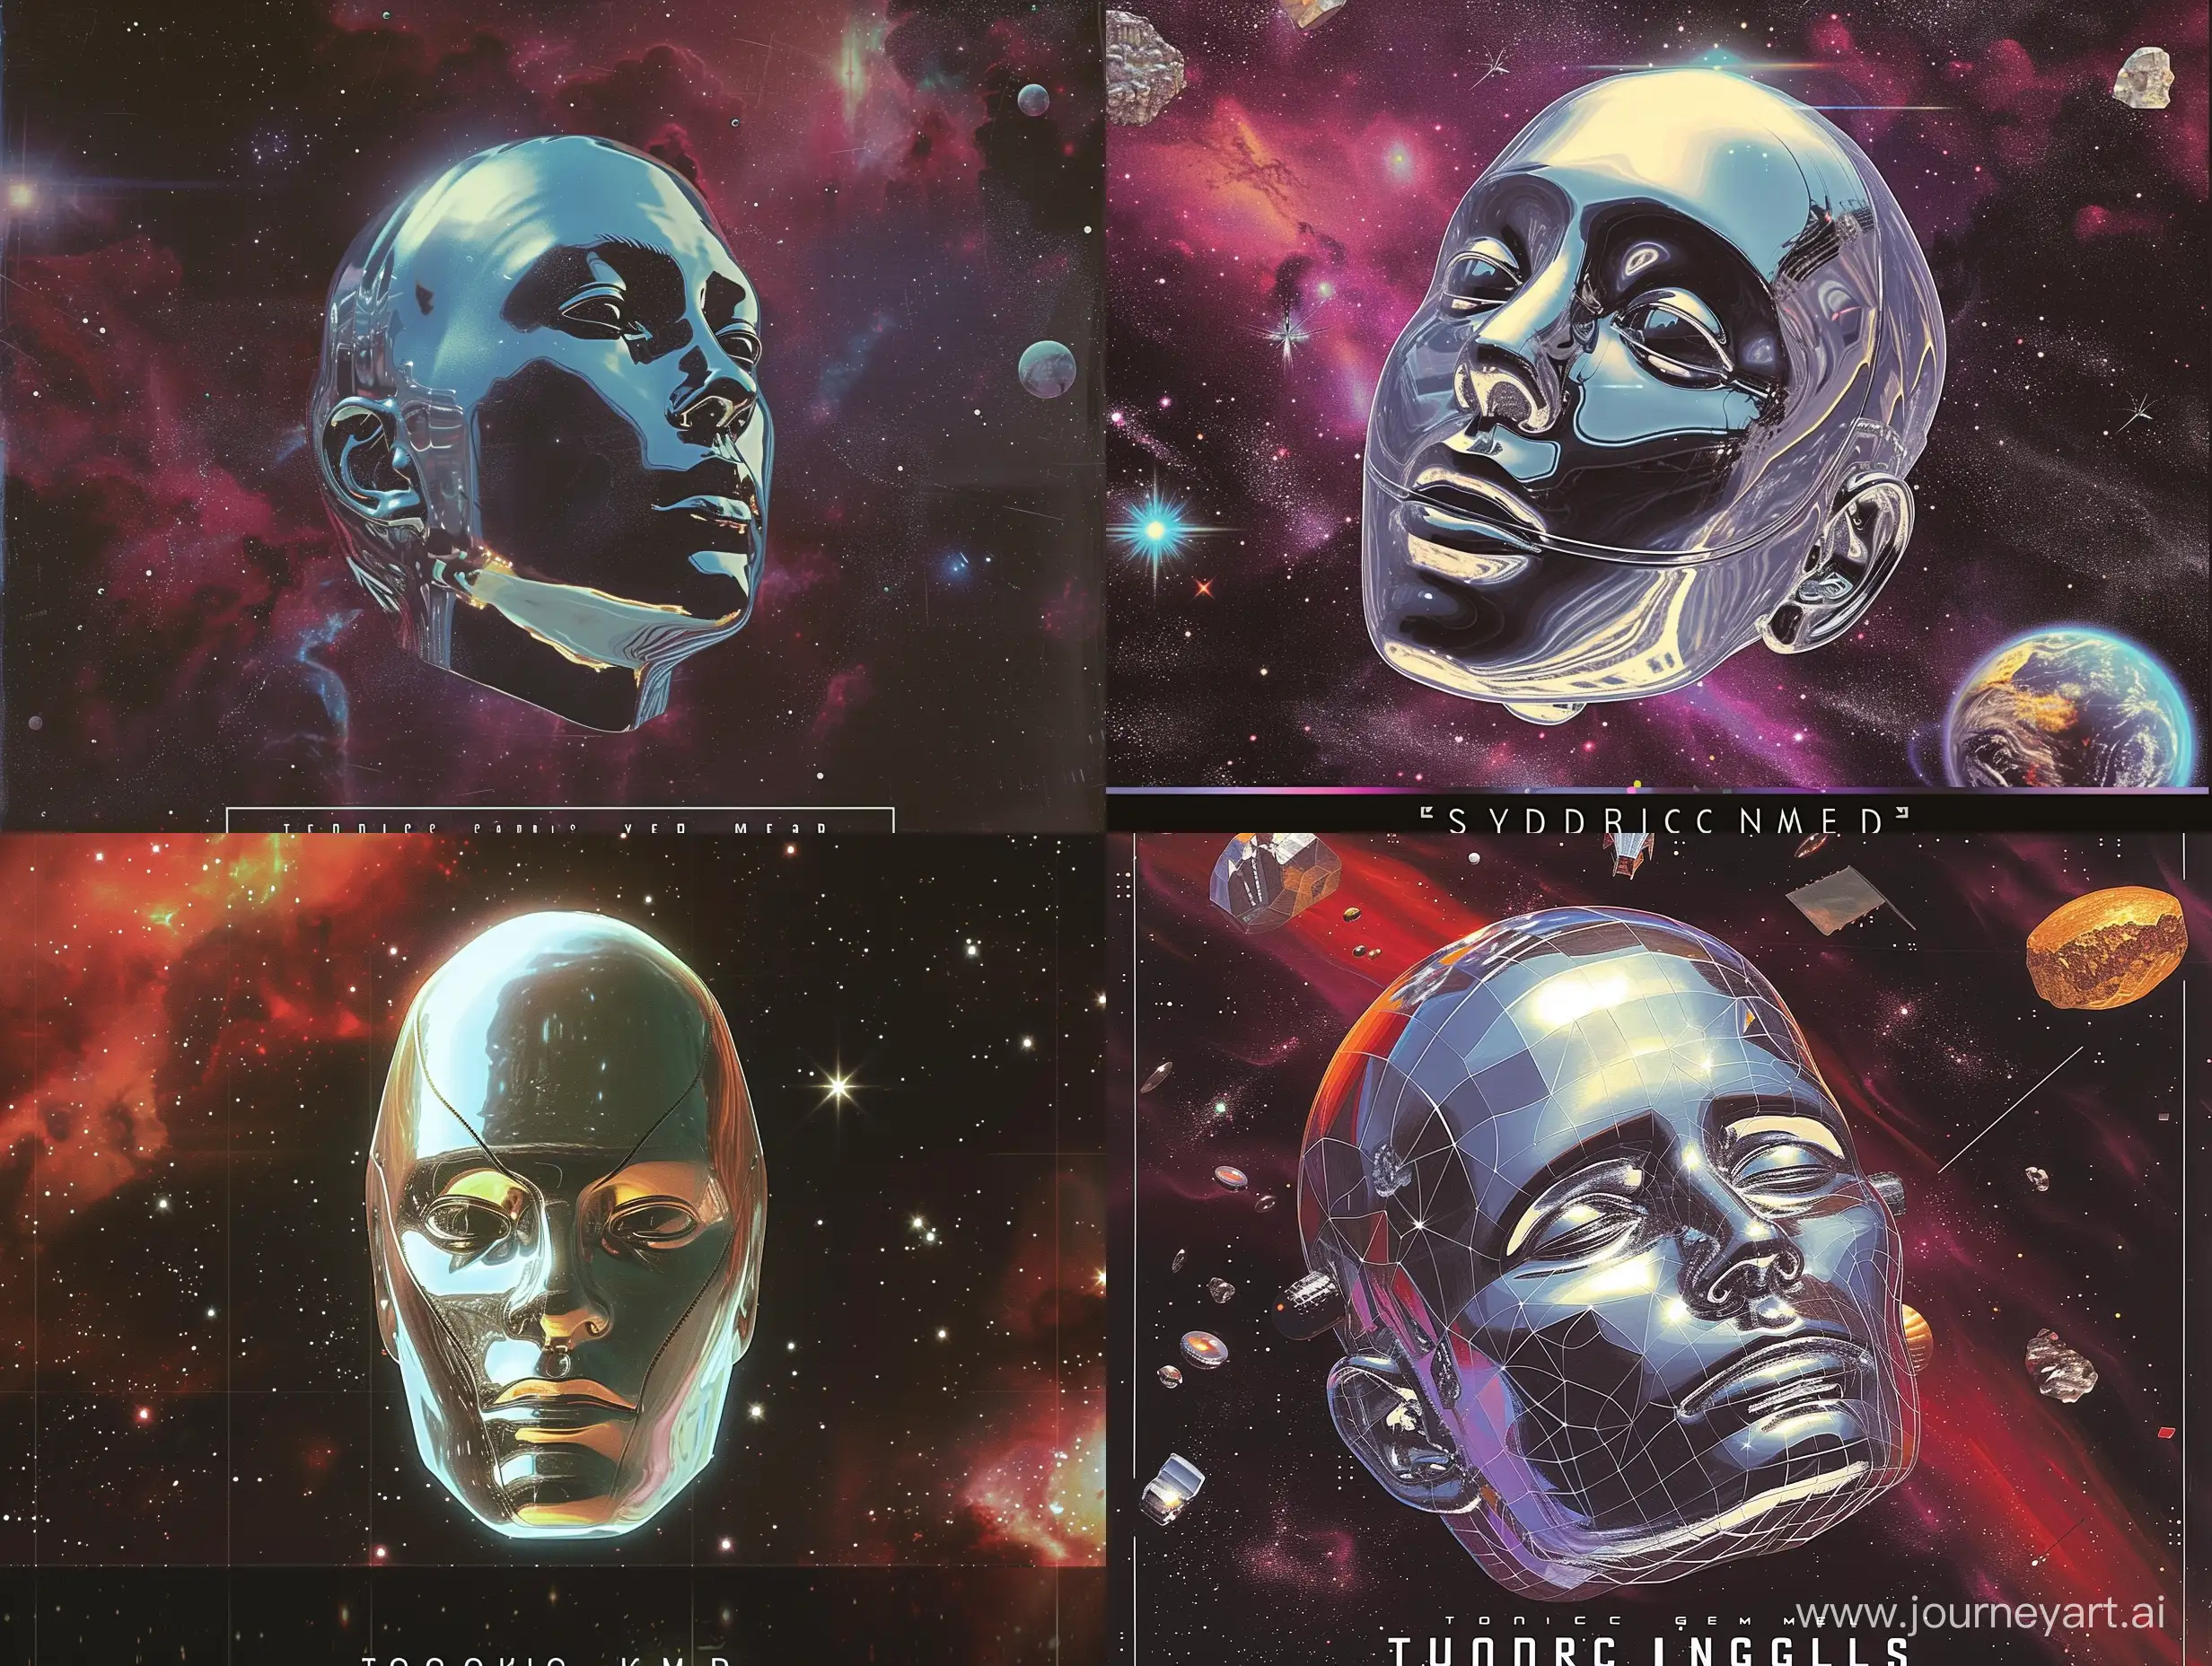 Retro-Synthwave-Space-Art-Giant-Silver-Head-in-70s-and-80s-Vintage-Aesthetic